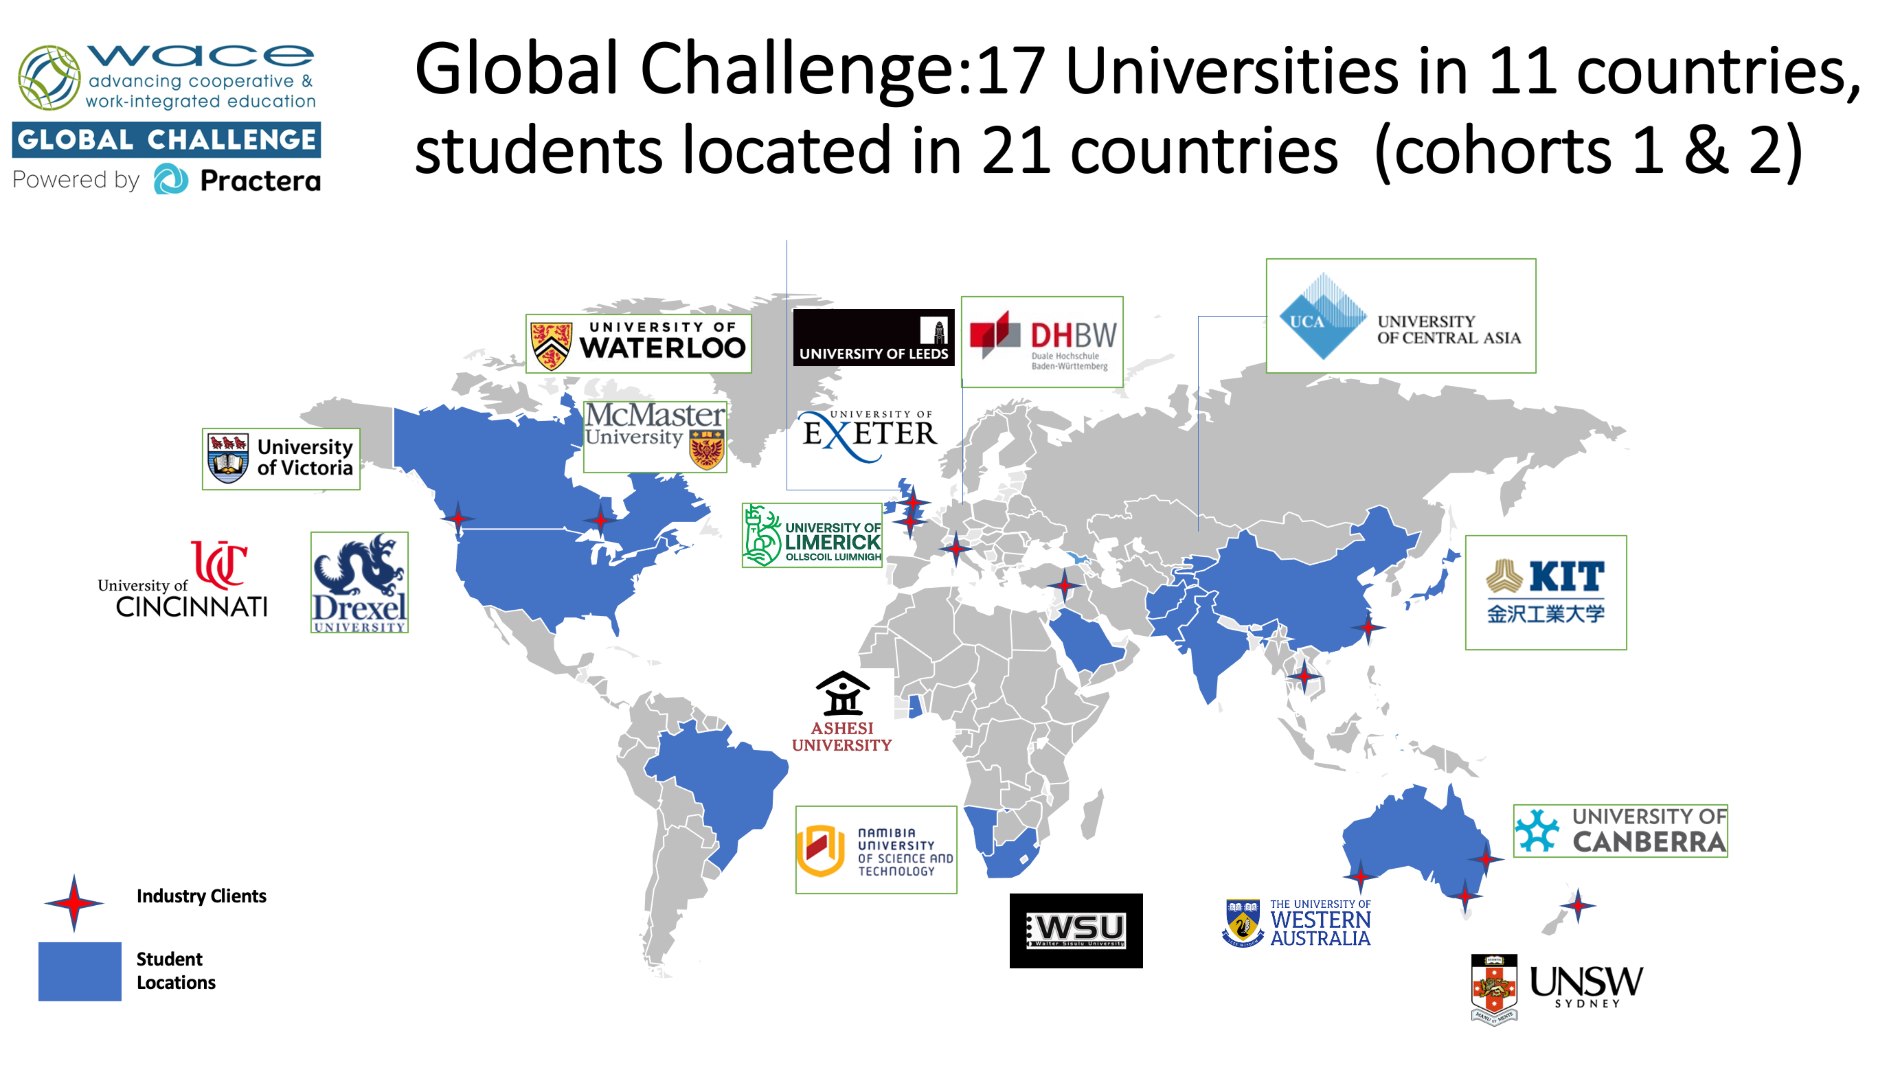 Global Challenge:17 Universities in 11 countries, students located in 21 countries (cohorts 1 & 2)